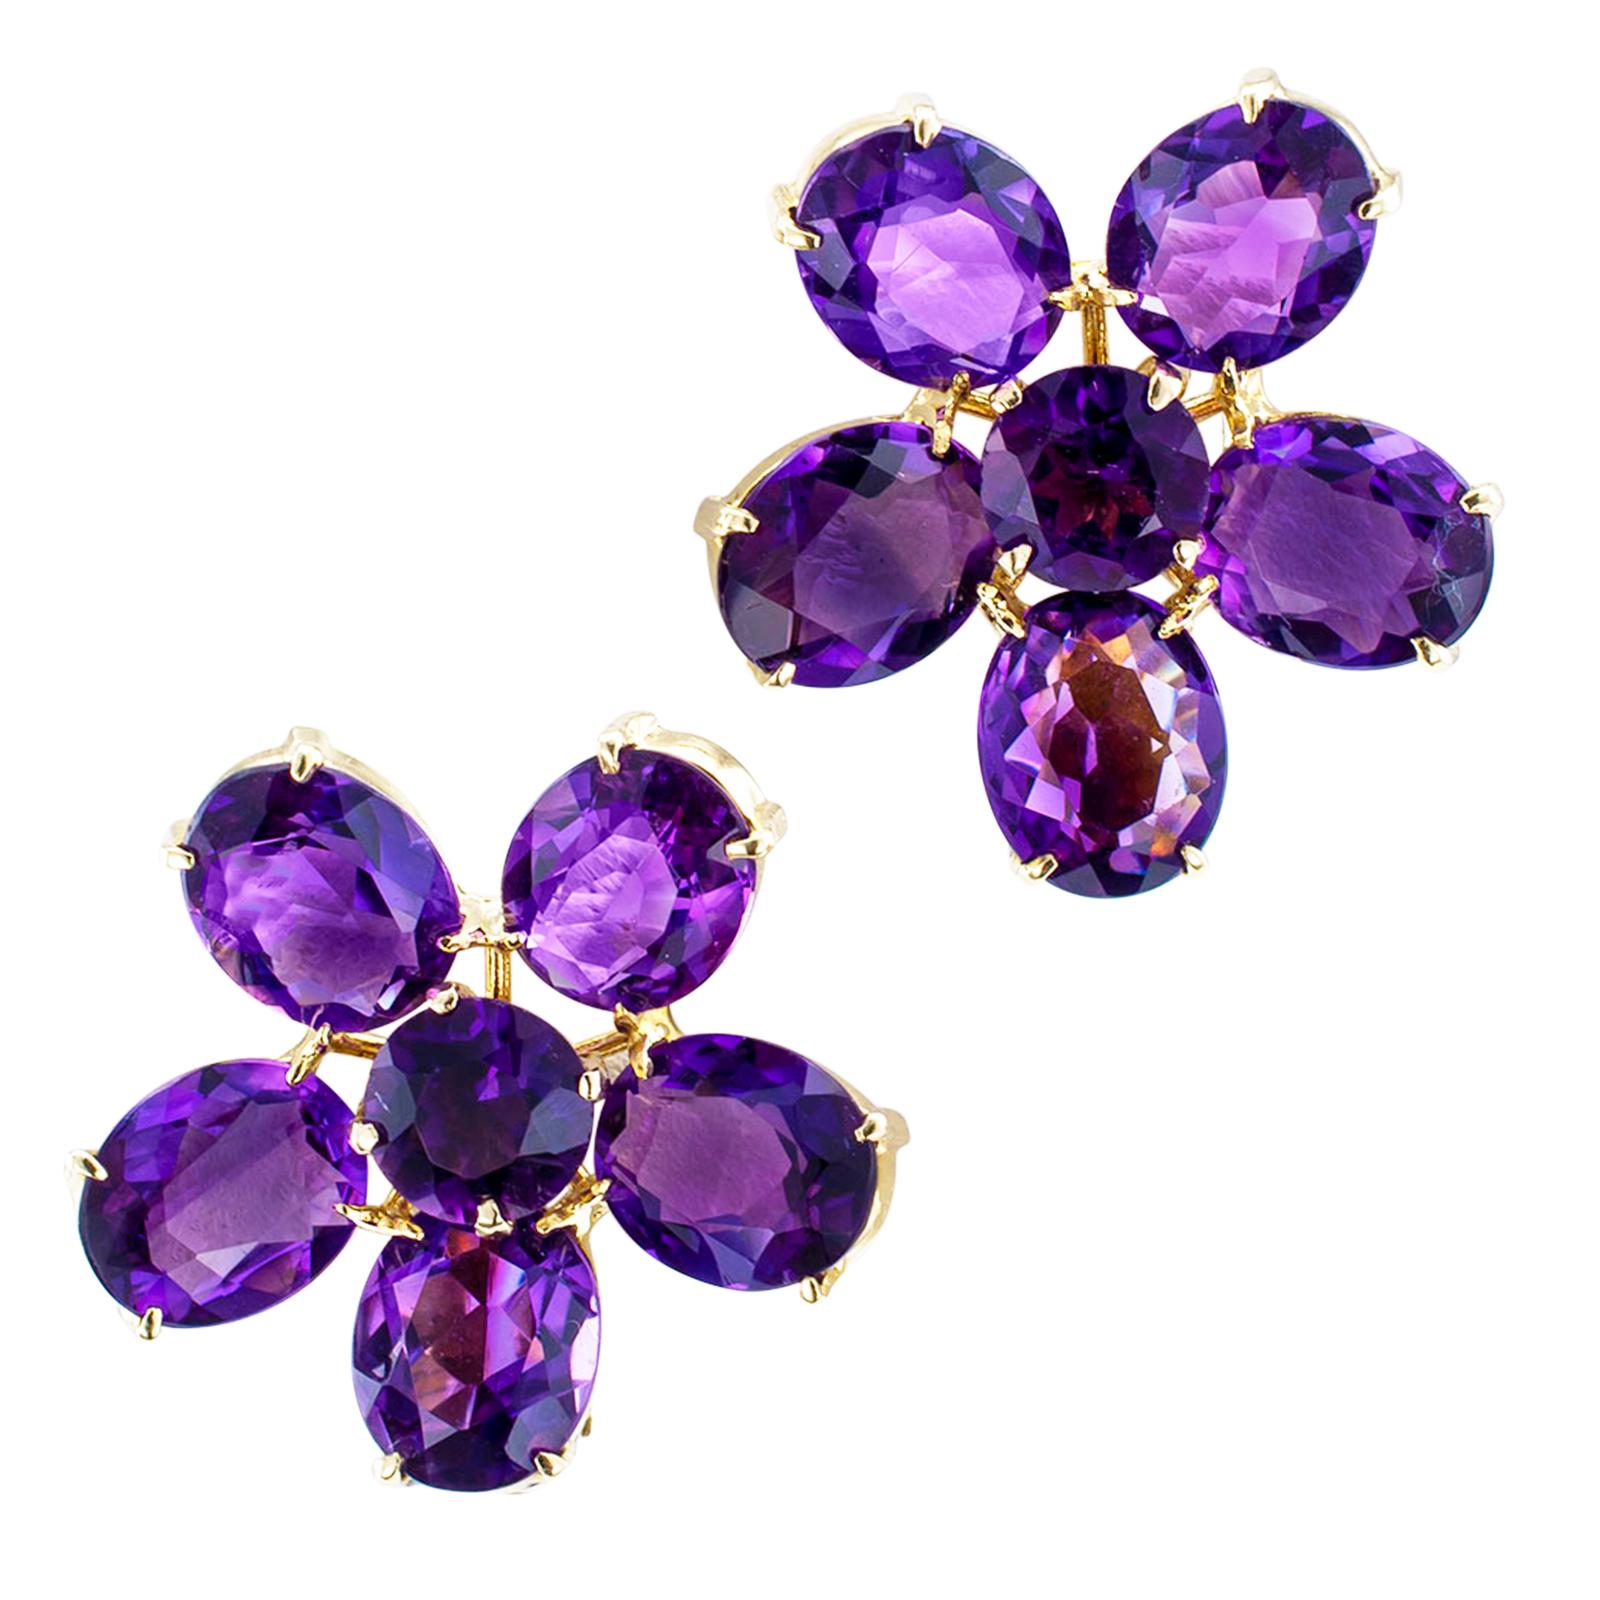 Retro amethyst and gold earrings.

DETAILS:
Retro flower-shaped amethyst and yellow gold clip back earrings circa 1950.
GEMSTONES: ten oval-shaped and two round faceted amethyst together totaling approximately 25.00 carats.
METAL: 14-karat yellow